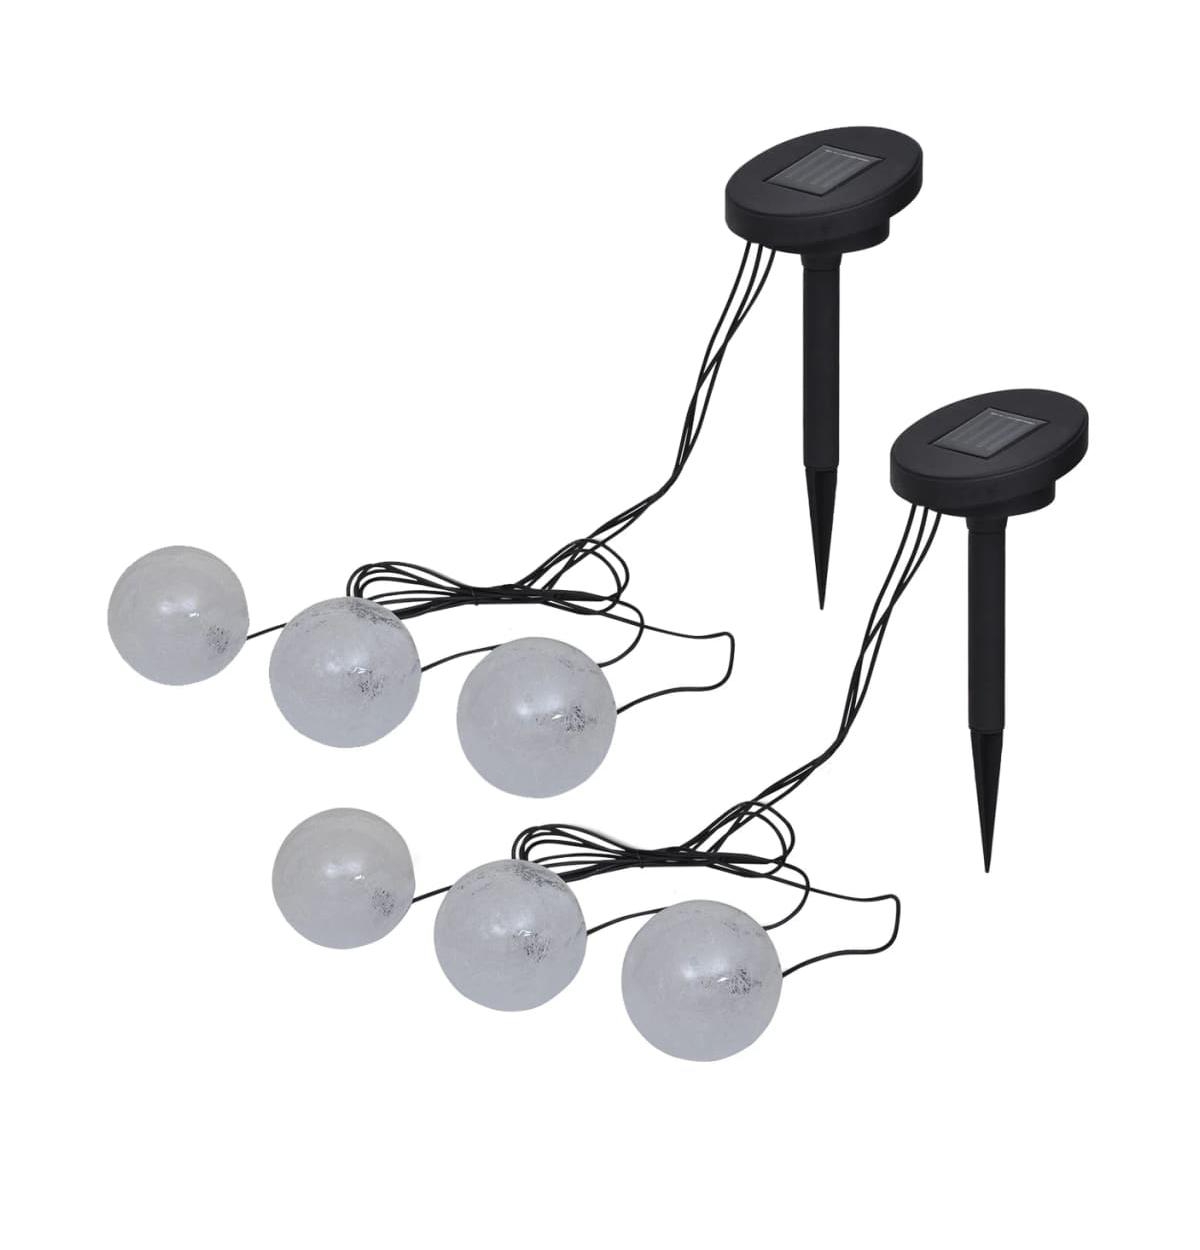 Floating Lamps 6 pcs Led for Pond and Pool - White